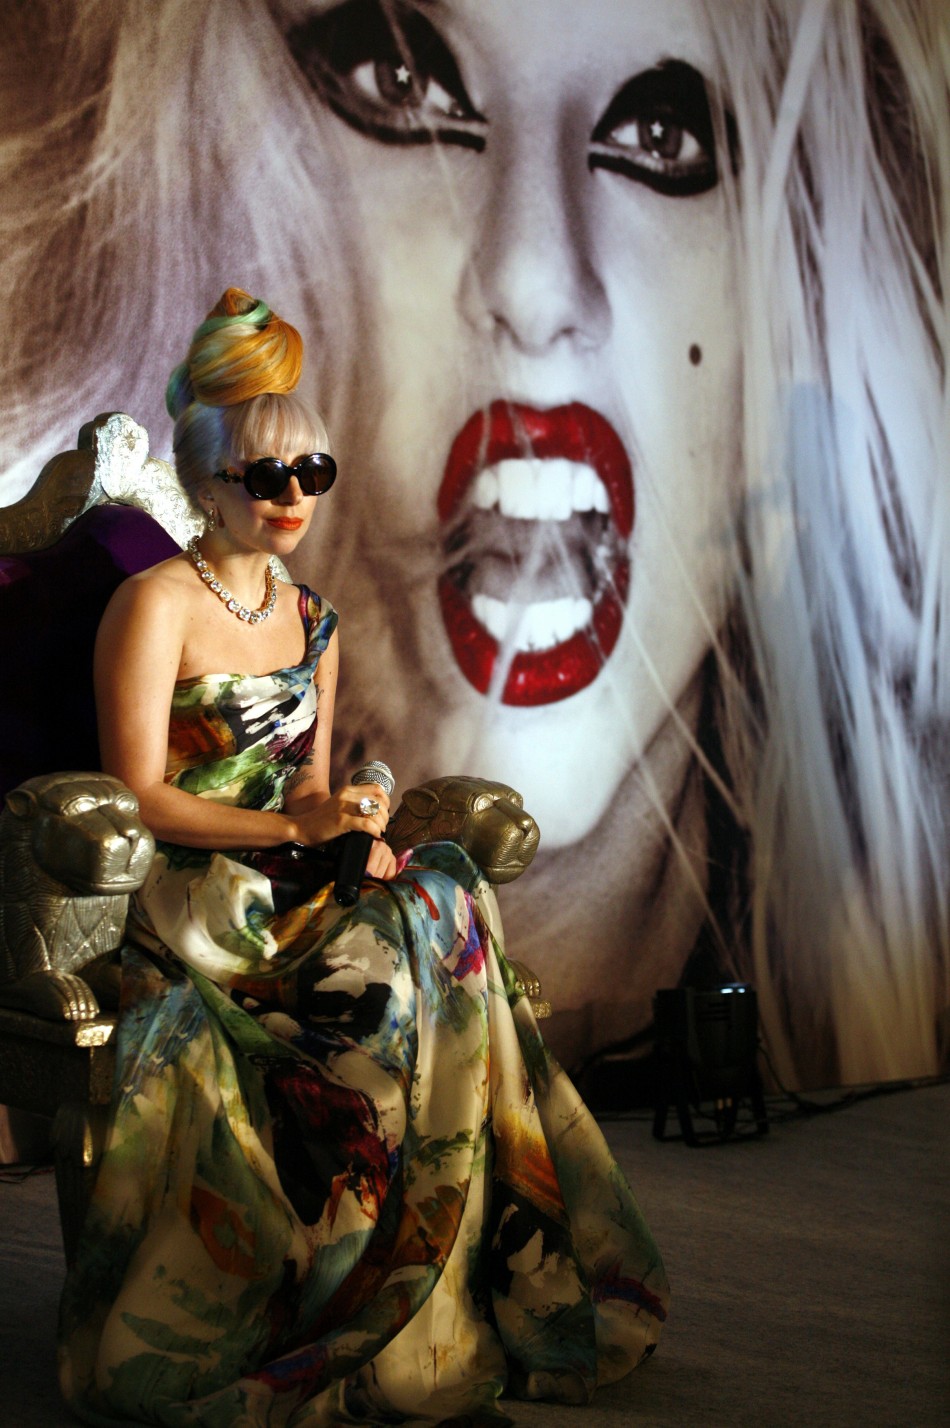 Lady Gaga attends a news conference in New Delhi